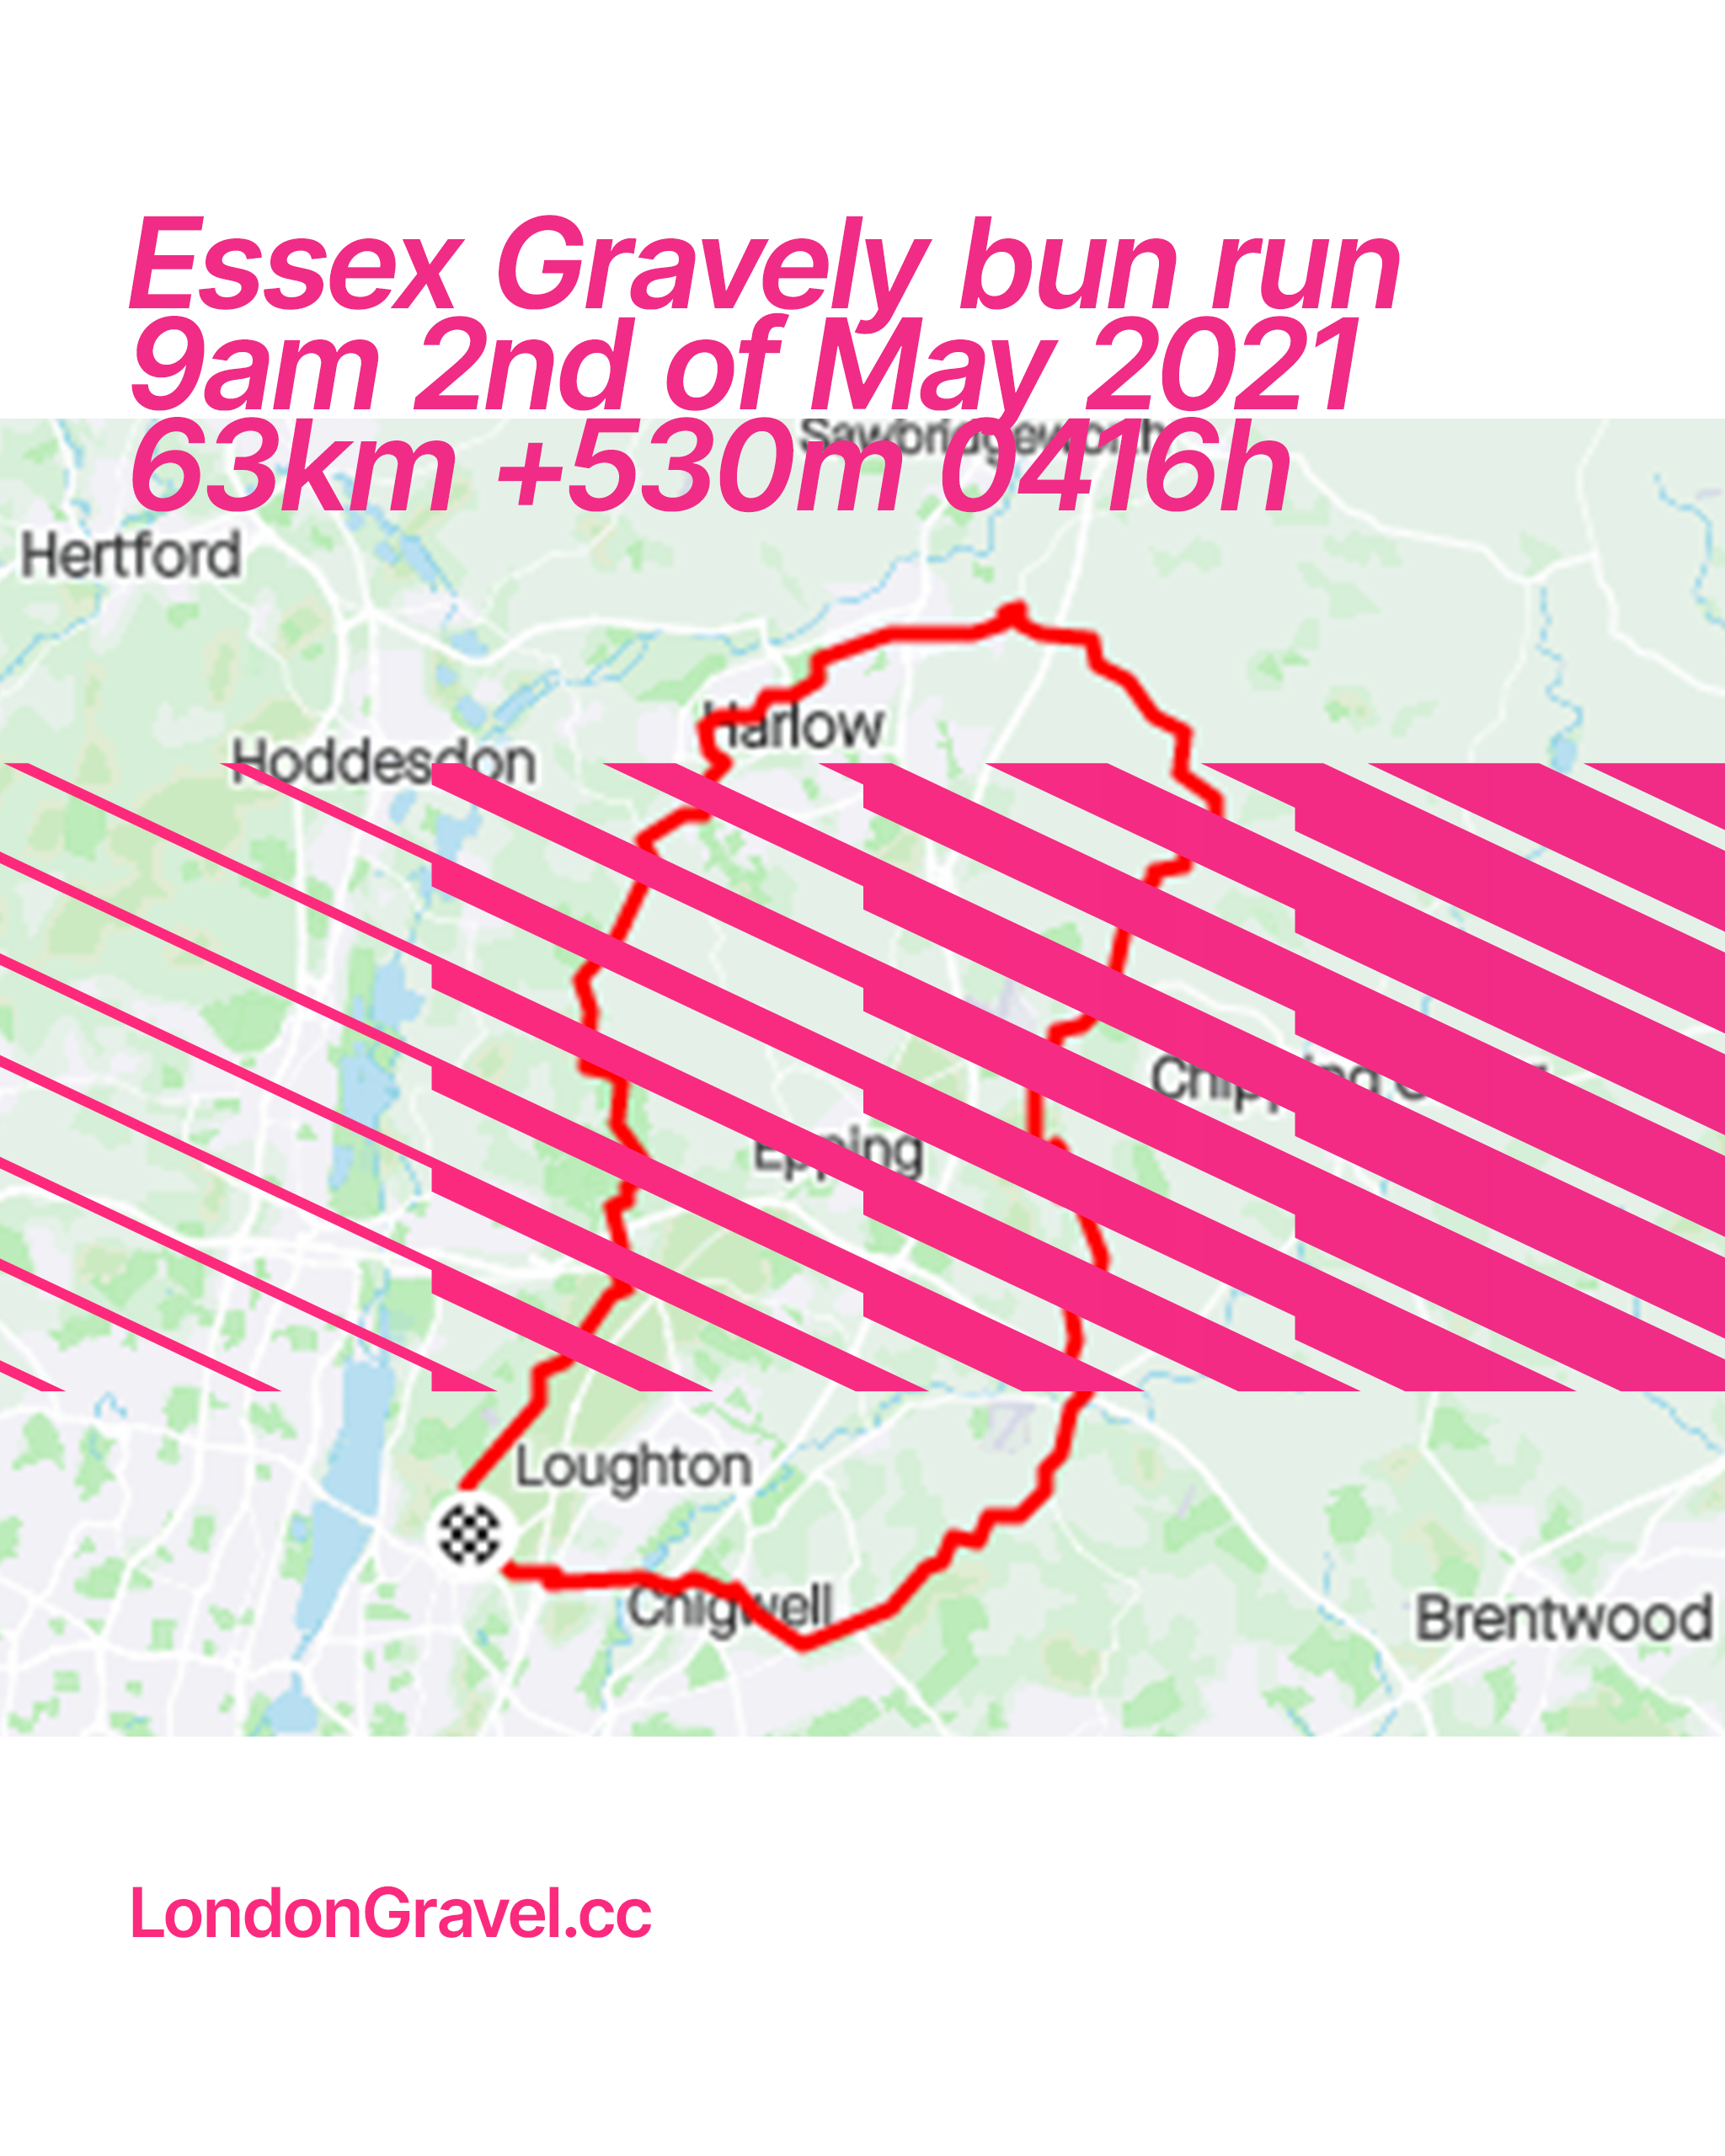  Essex Gravely bun run to Mayfield Bakery in Harlow